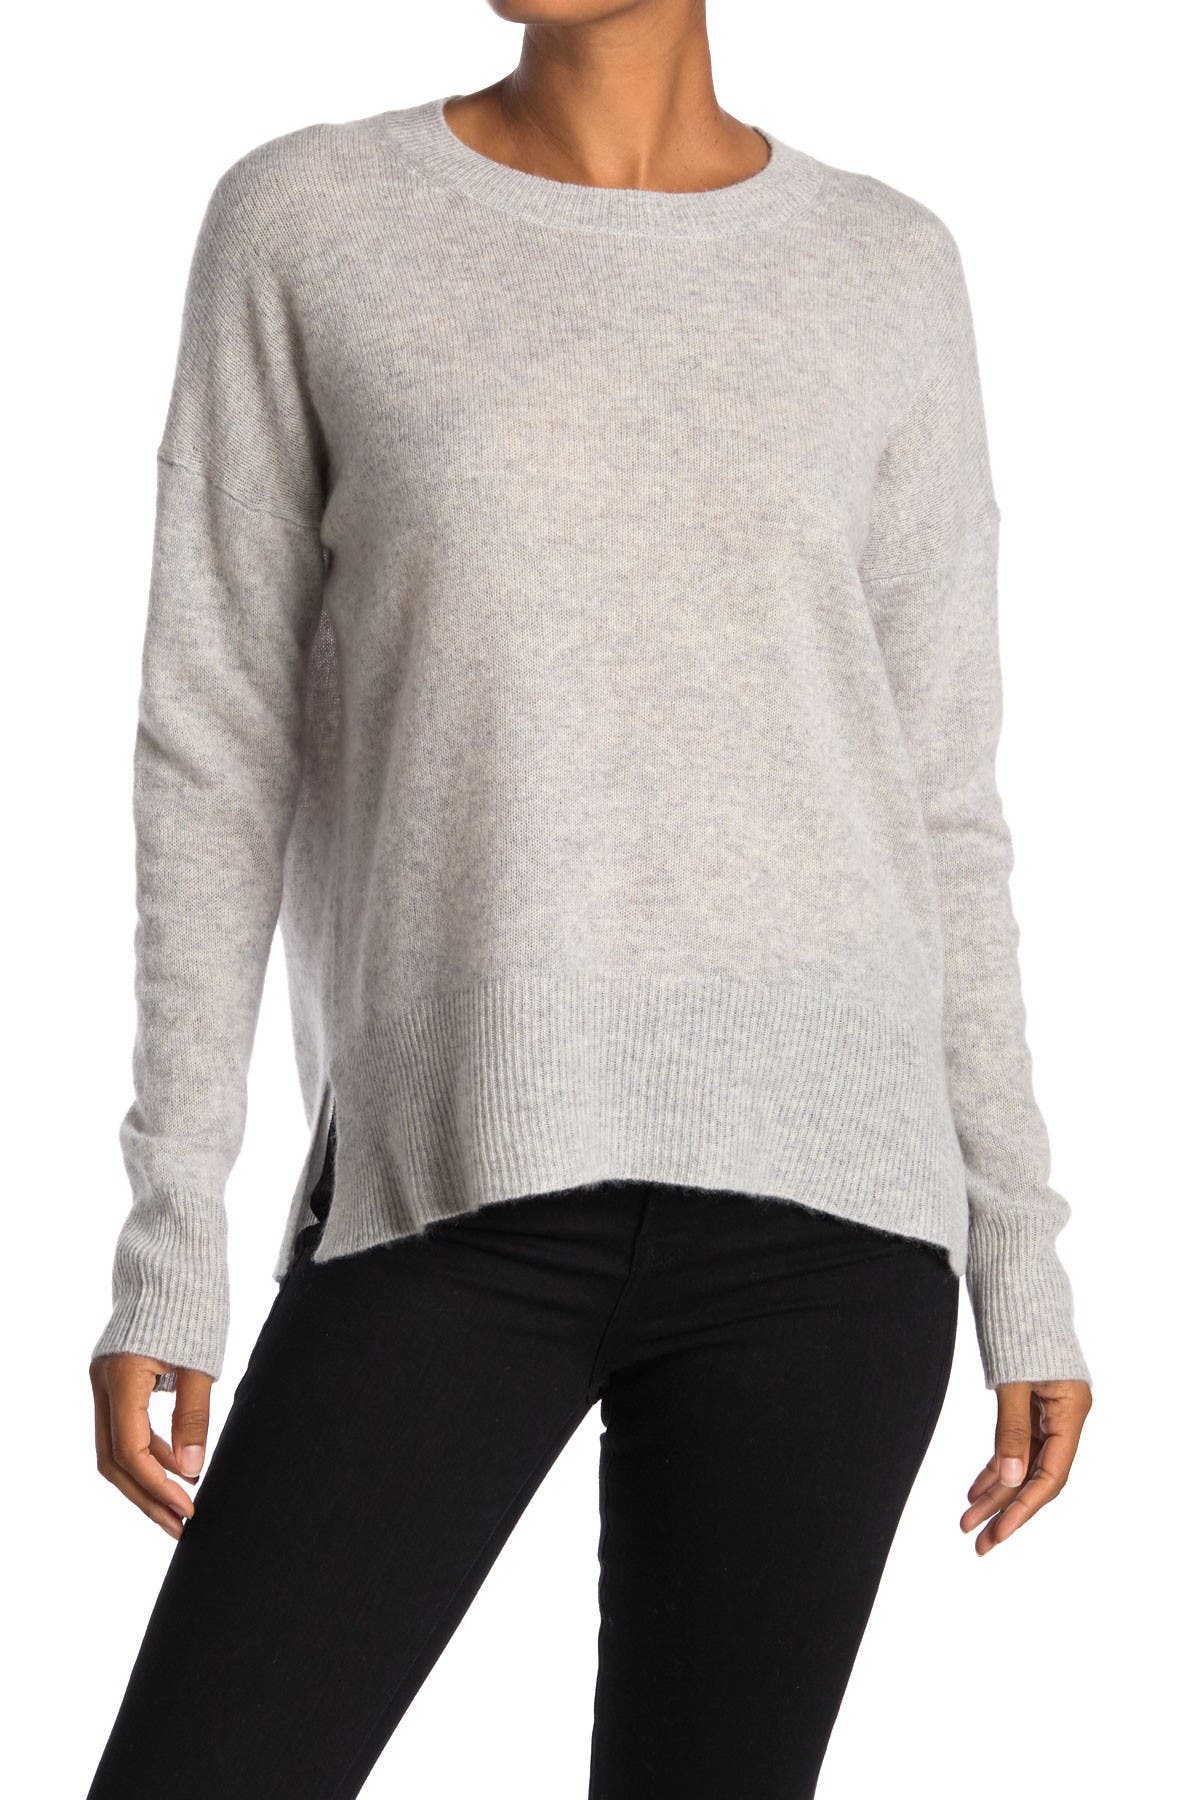 M Magaschoni | High/Low Pullover Cashmere Sweater | Nordstrom Rack